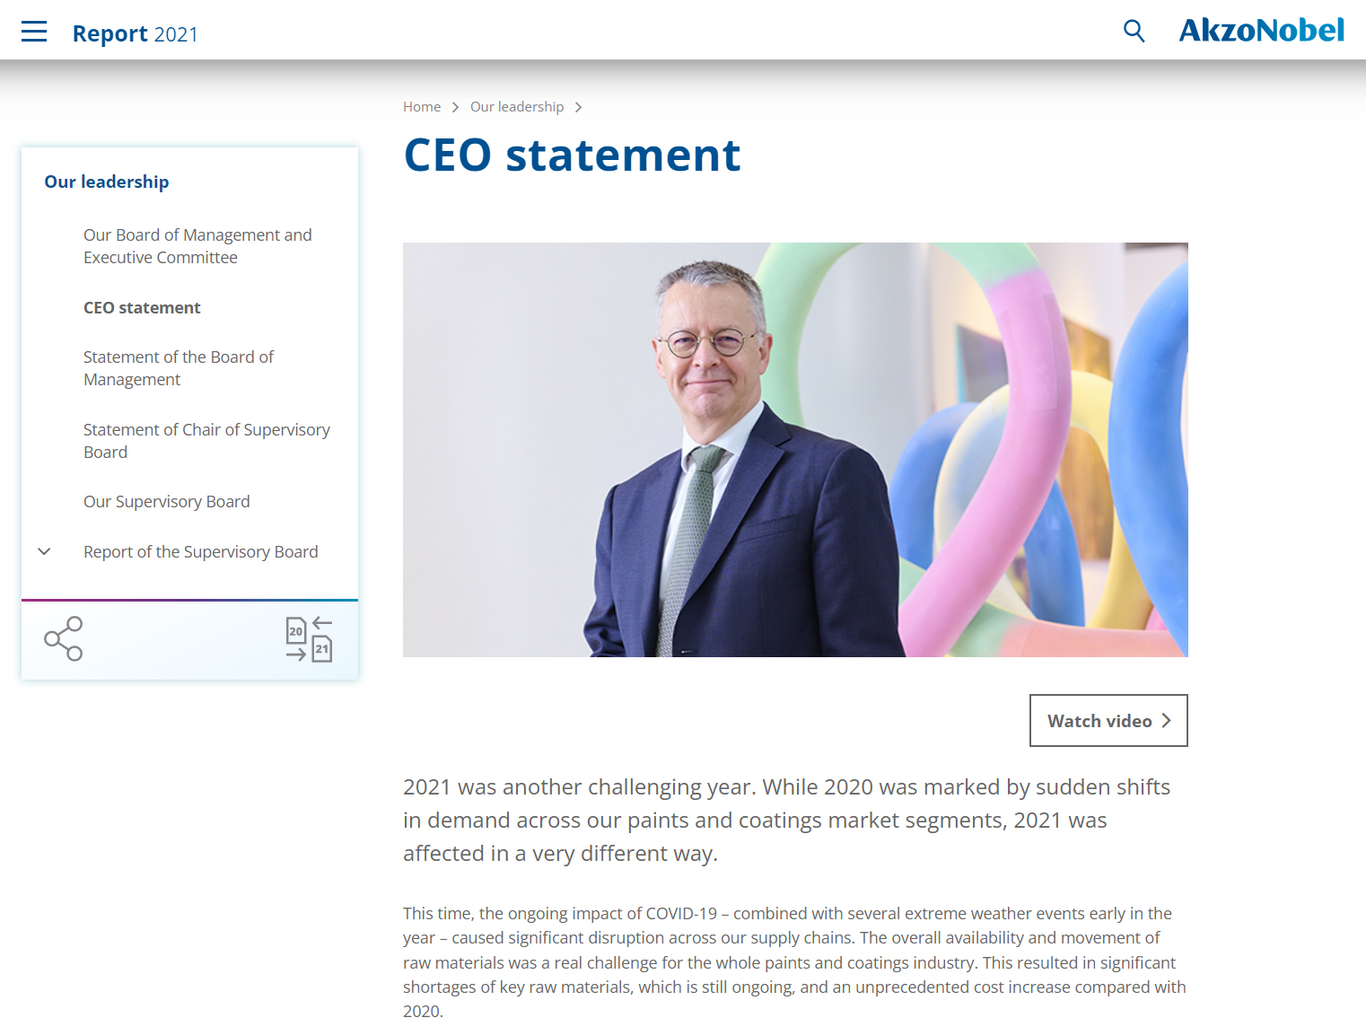 Screenshot from Akzo Nobel's Annual Report 2021 CEO statement